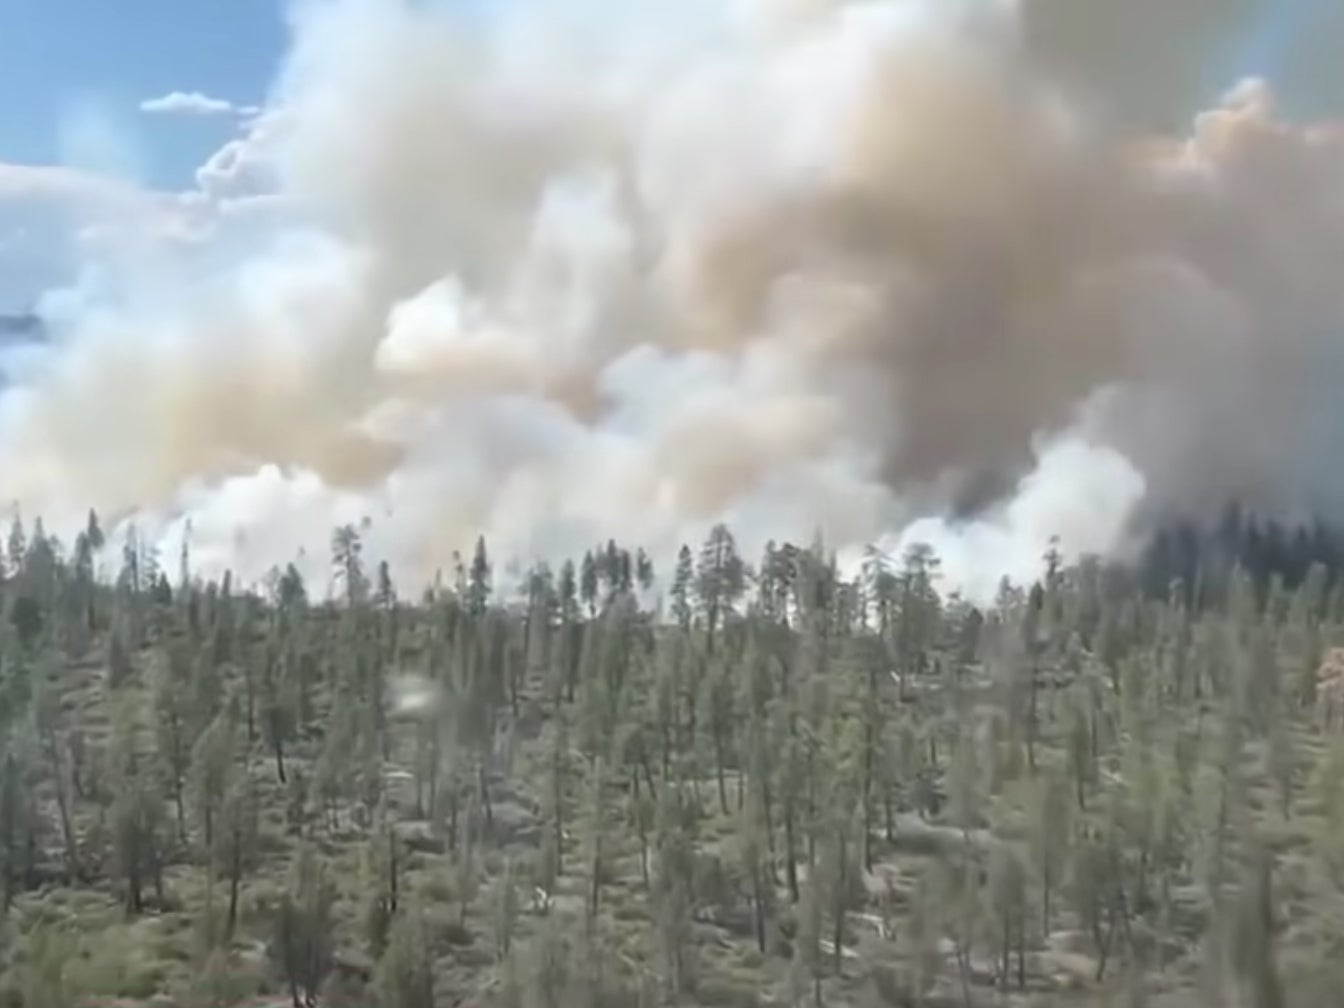 A wildfire burns in Siskiyou County, California after a lightning strike set the forest ablaze